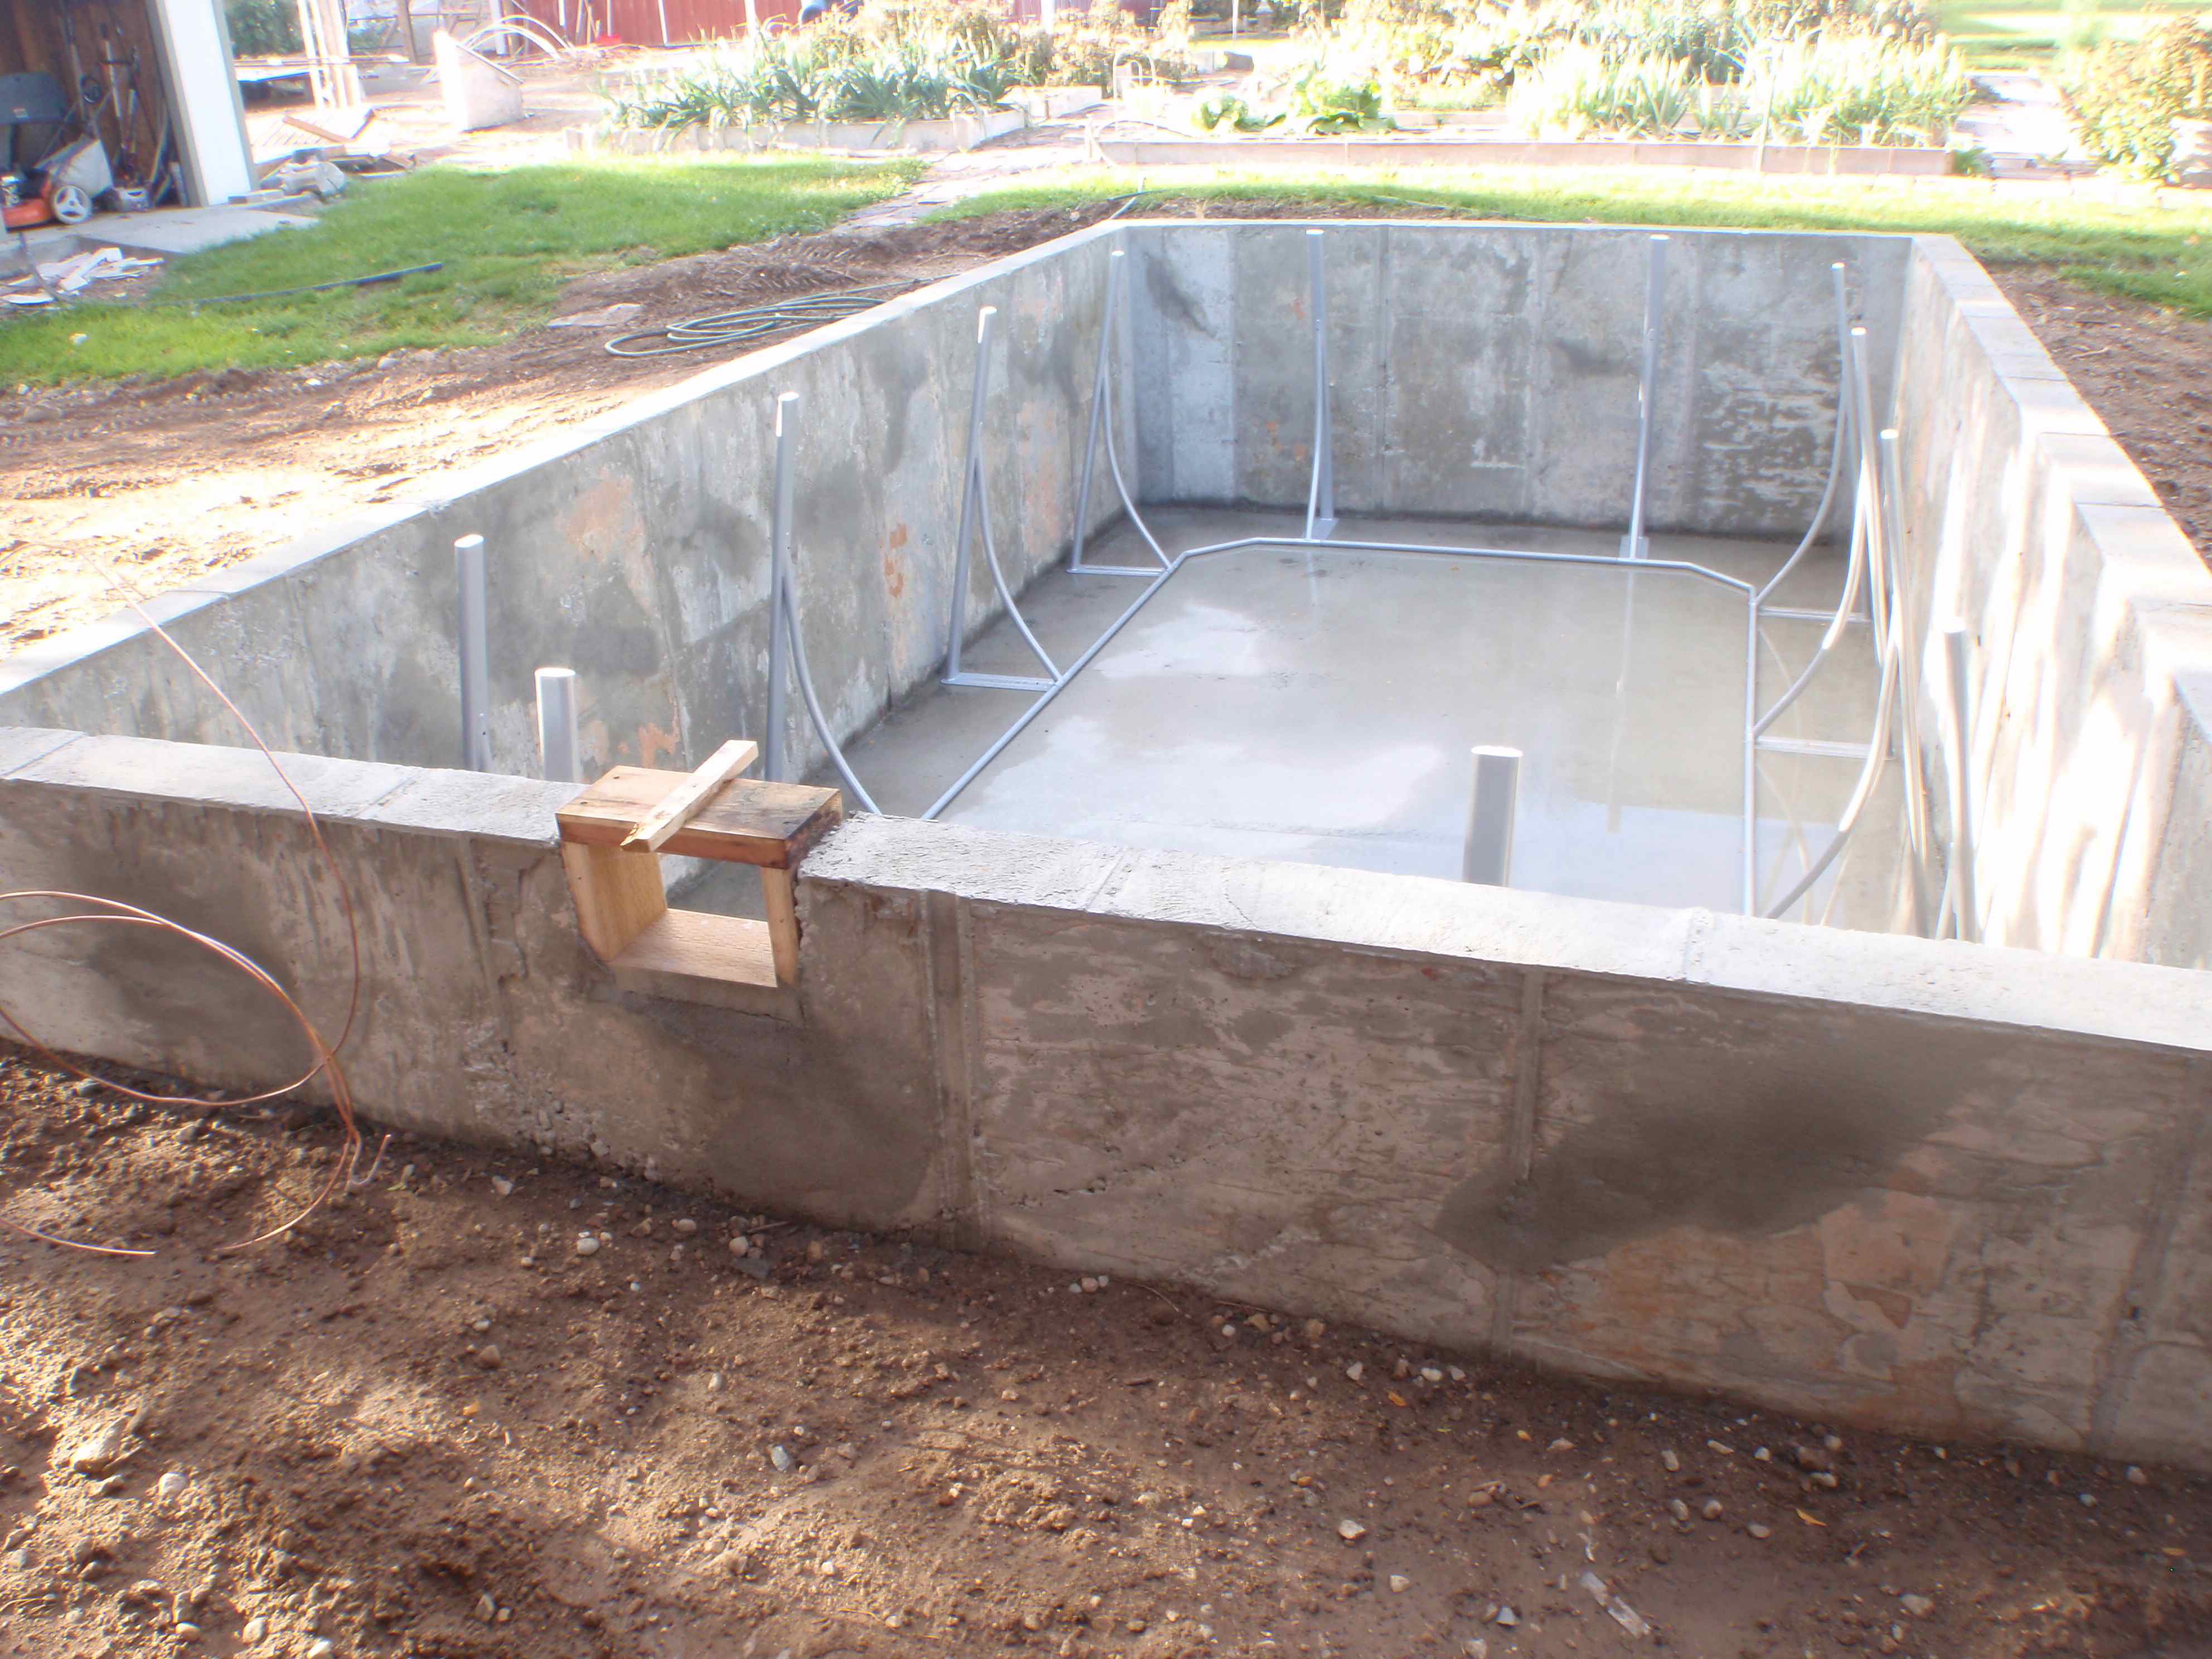 Putting in a Swimming Pool for Triathlon Training - The Cement Box